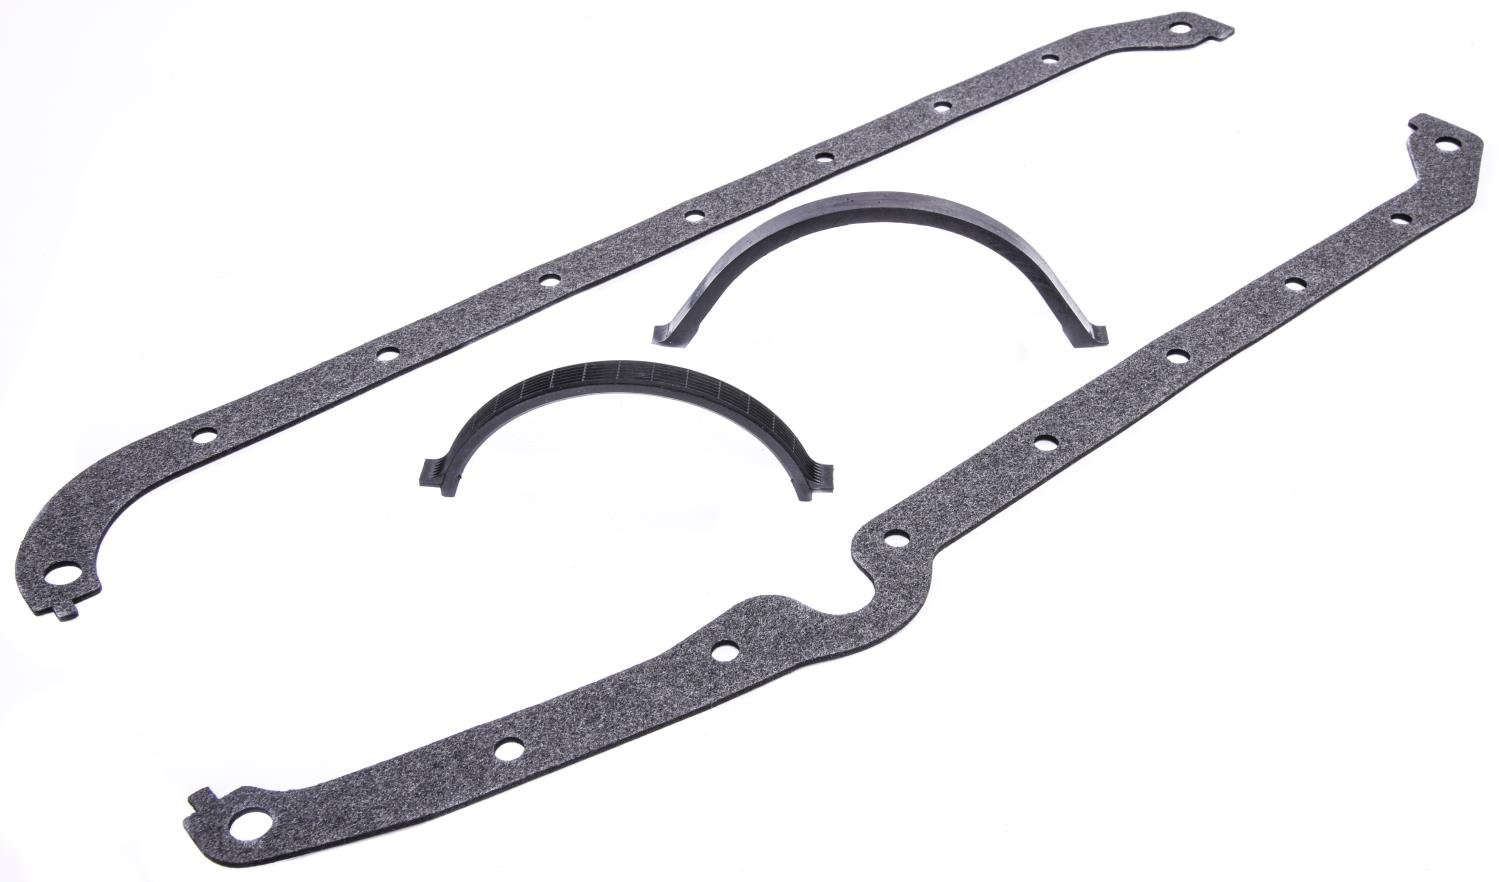 Oil Pan Gasket Set for 1957-1974 Small Block Chevy